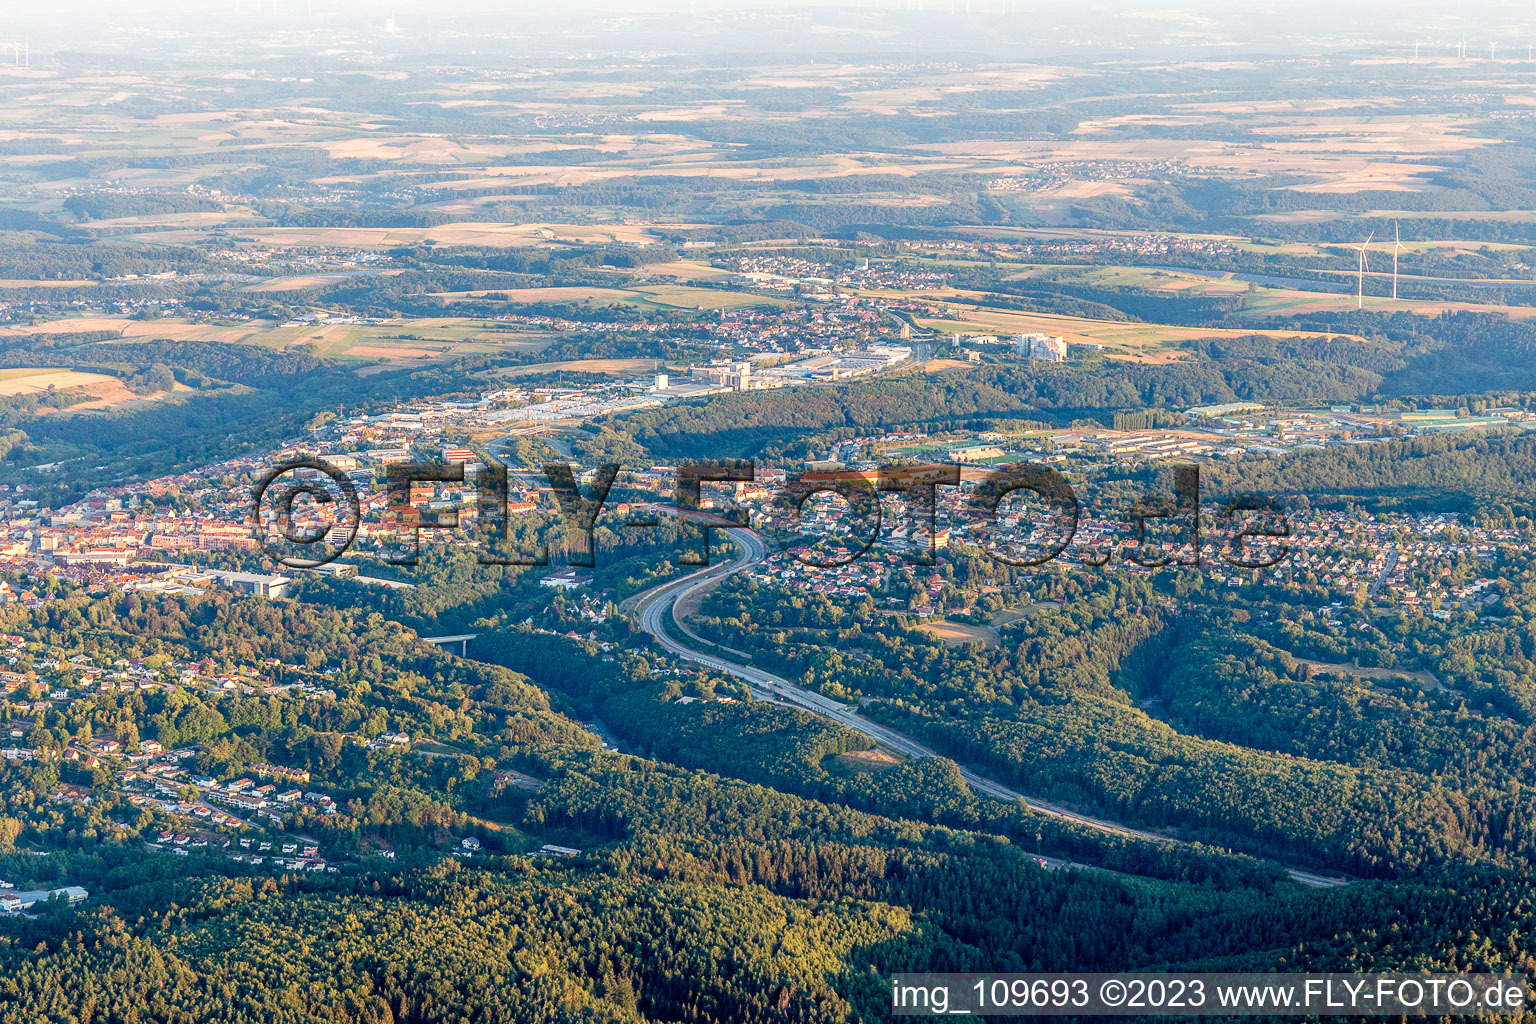 Pirmasens in the state Rhineland-Palatinate, Germany from above